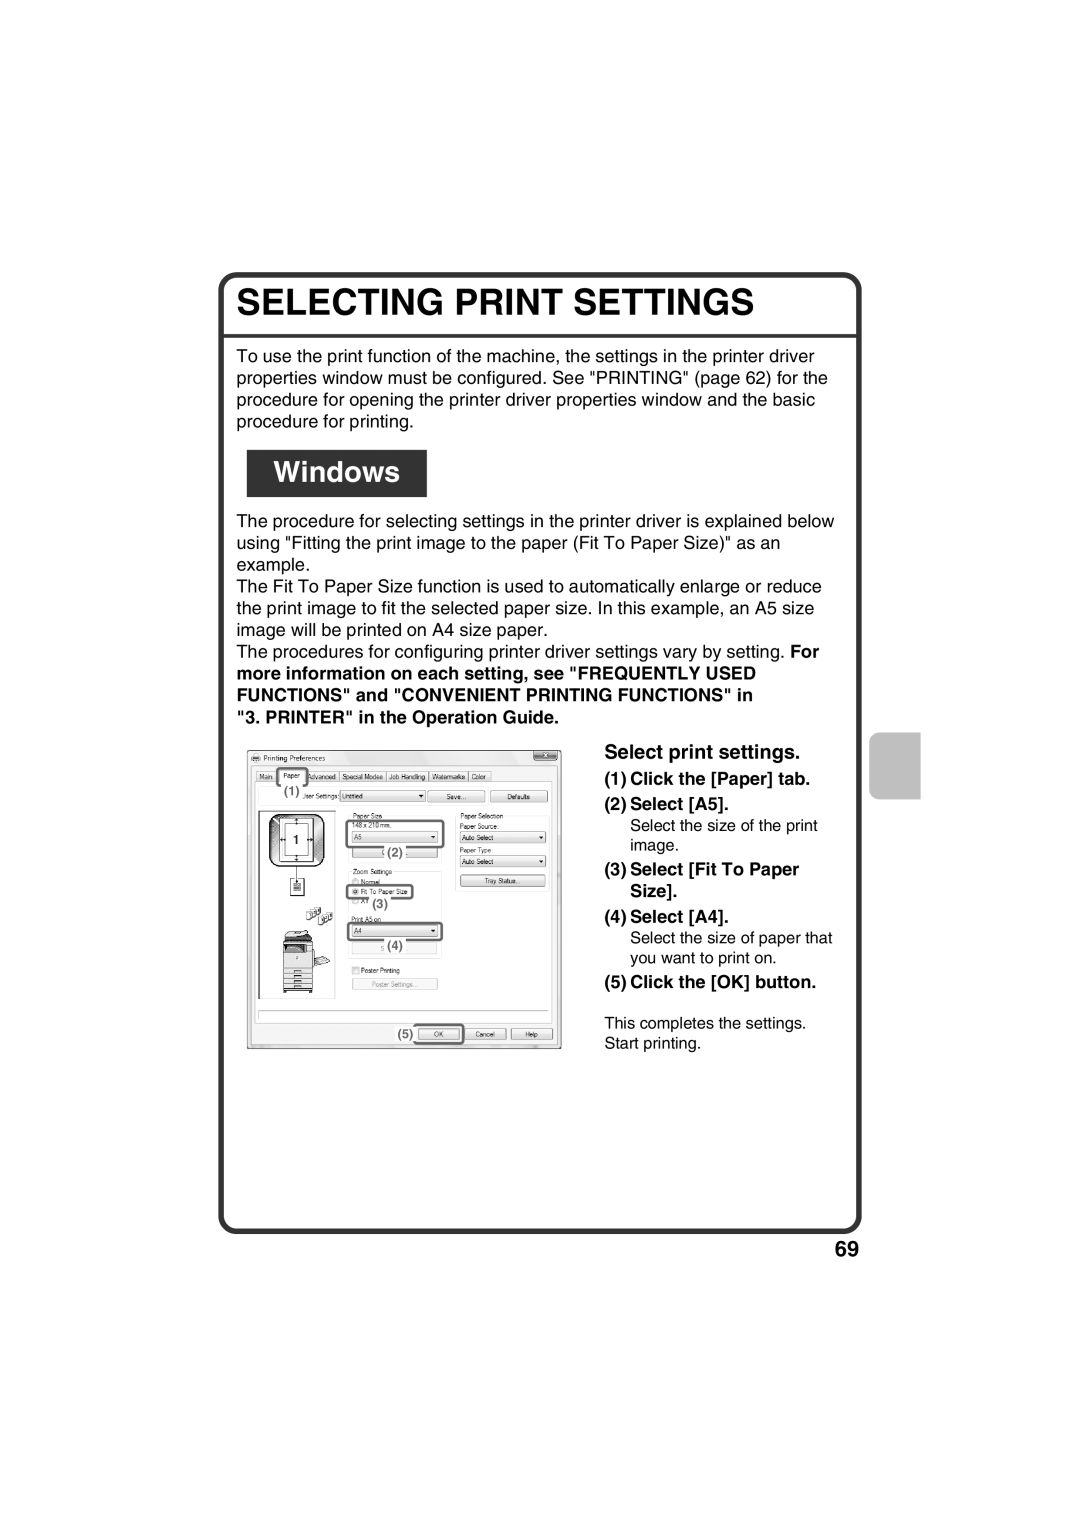 Sharp MX-C381 Selecting Print Settings, Select print settings, PRINTER in the Operation Guide, Select A5, Select A4 